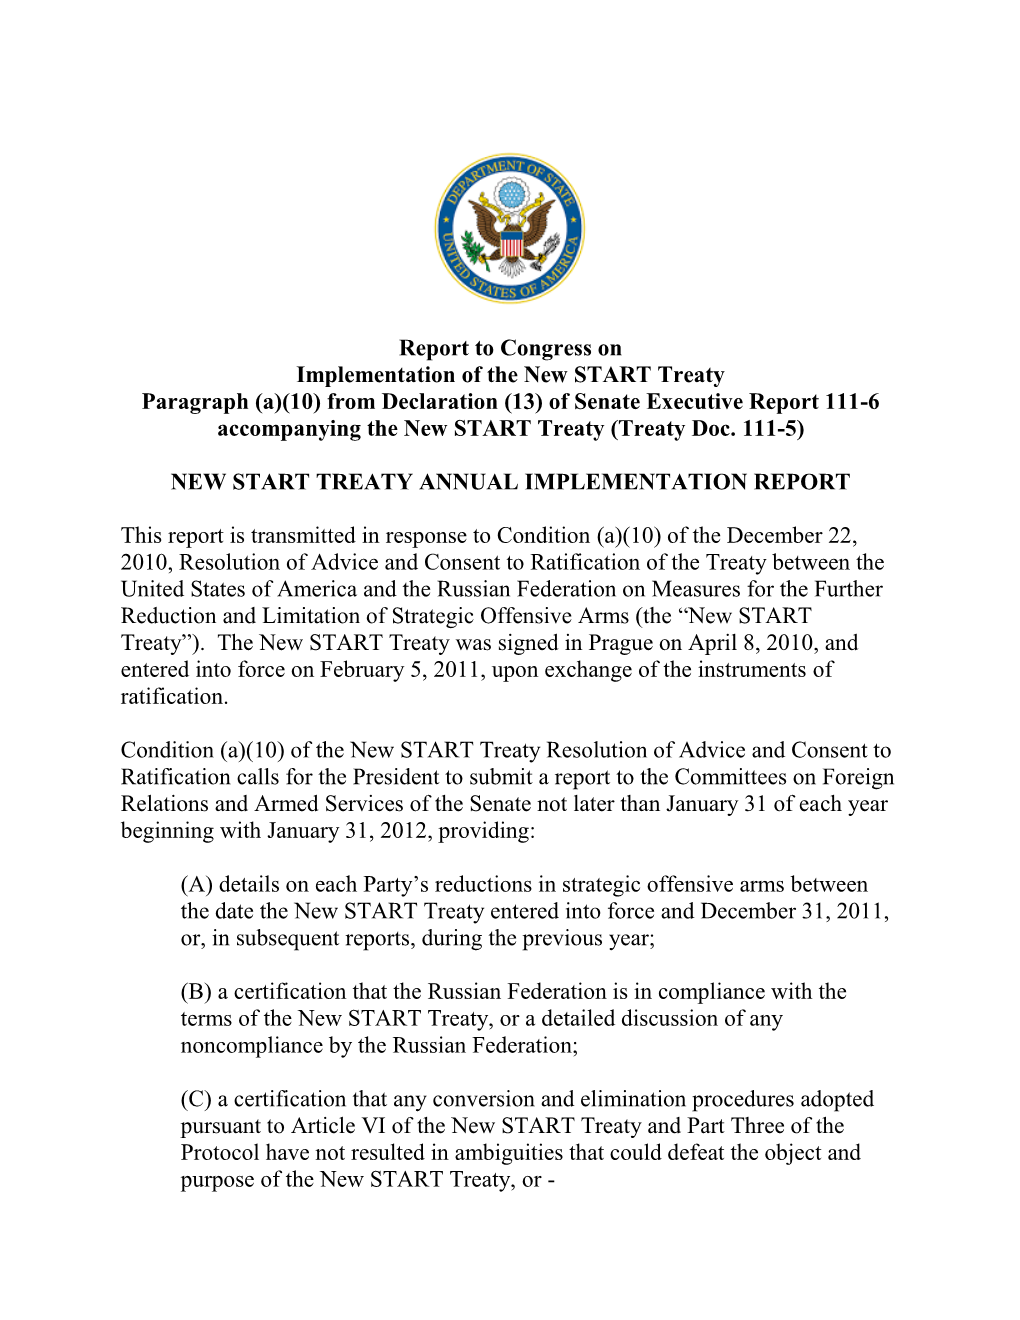 New Start Treaty Annual Implementation Report